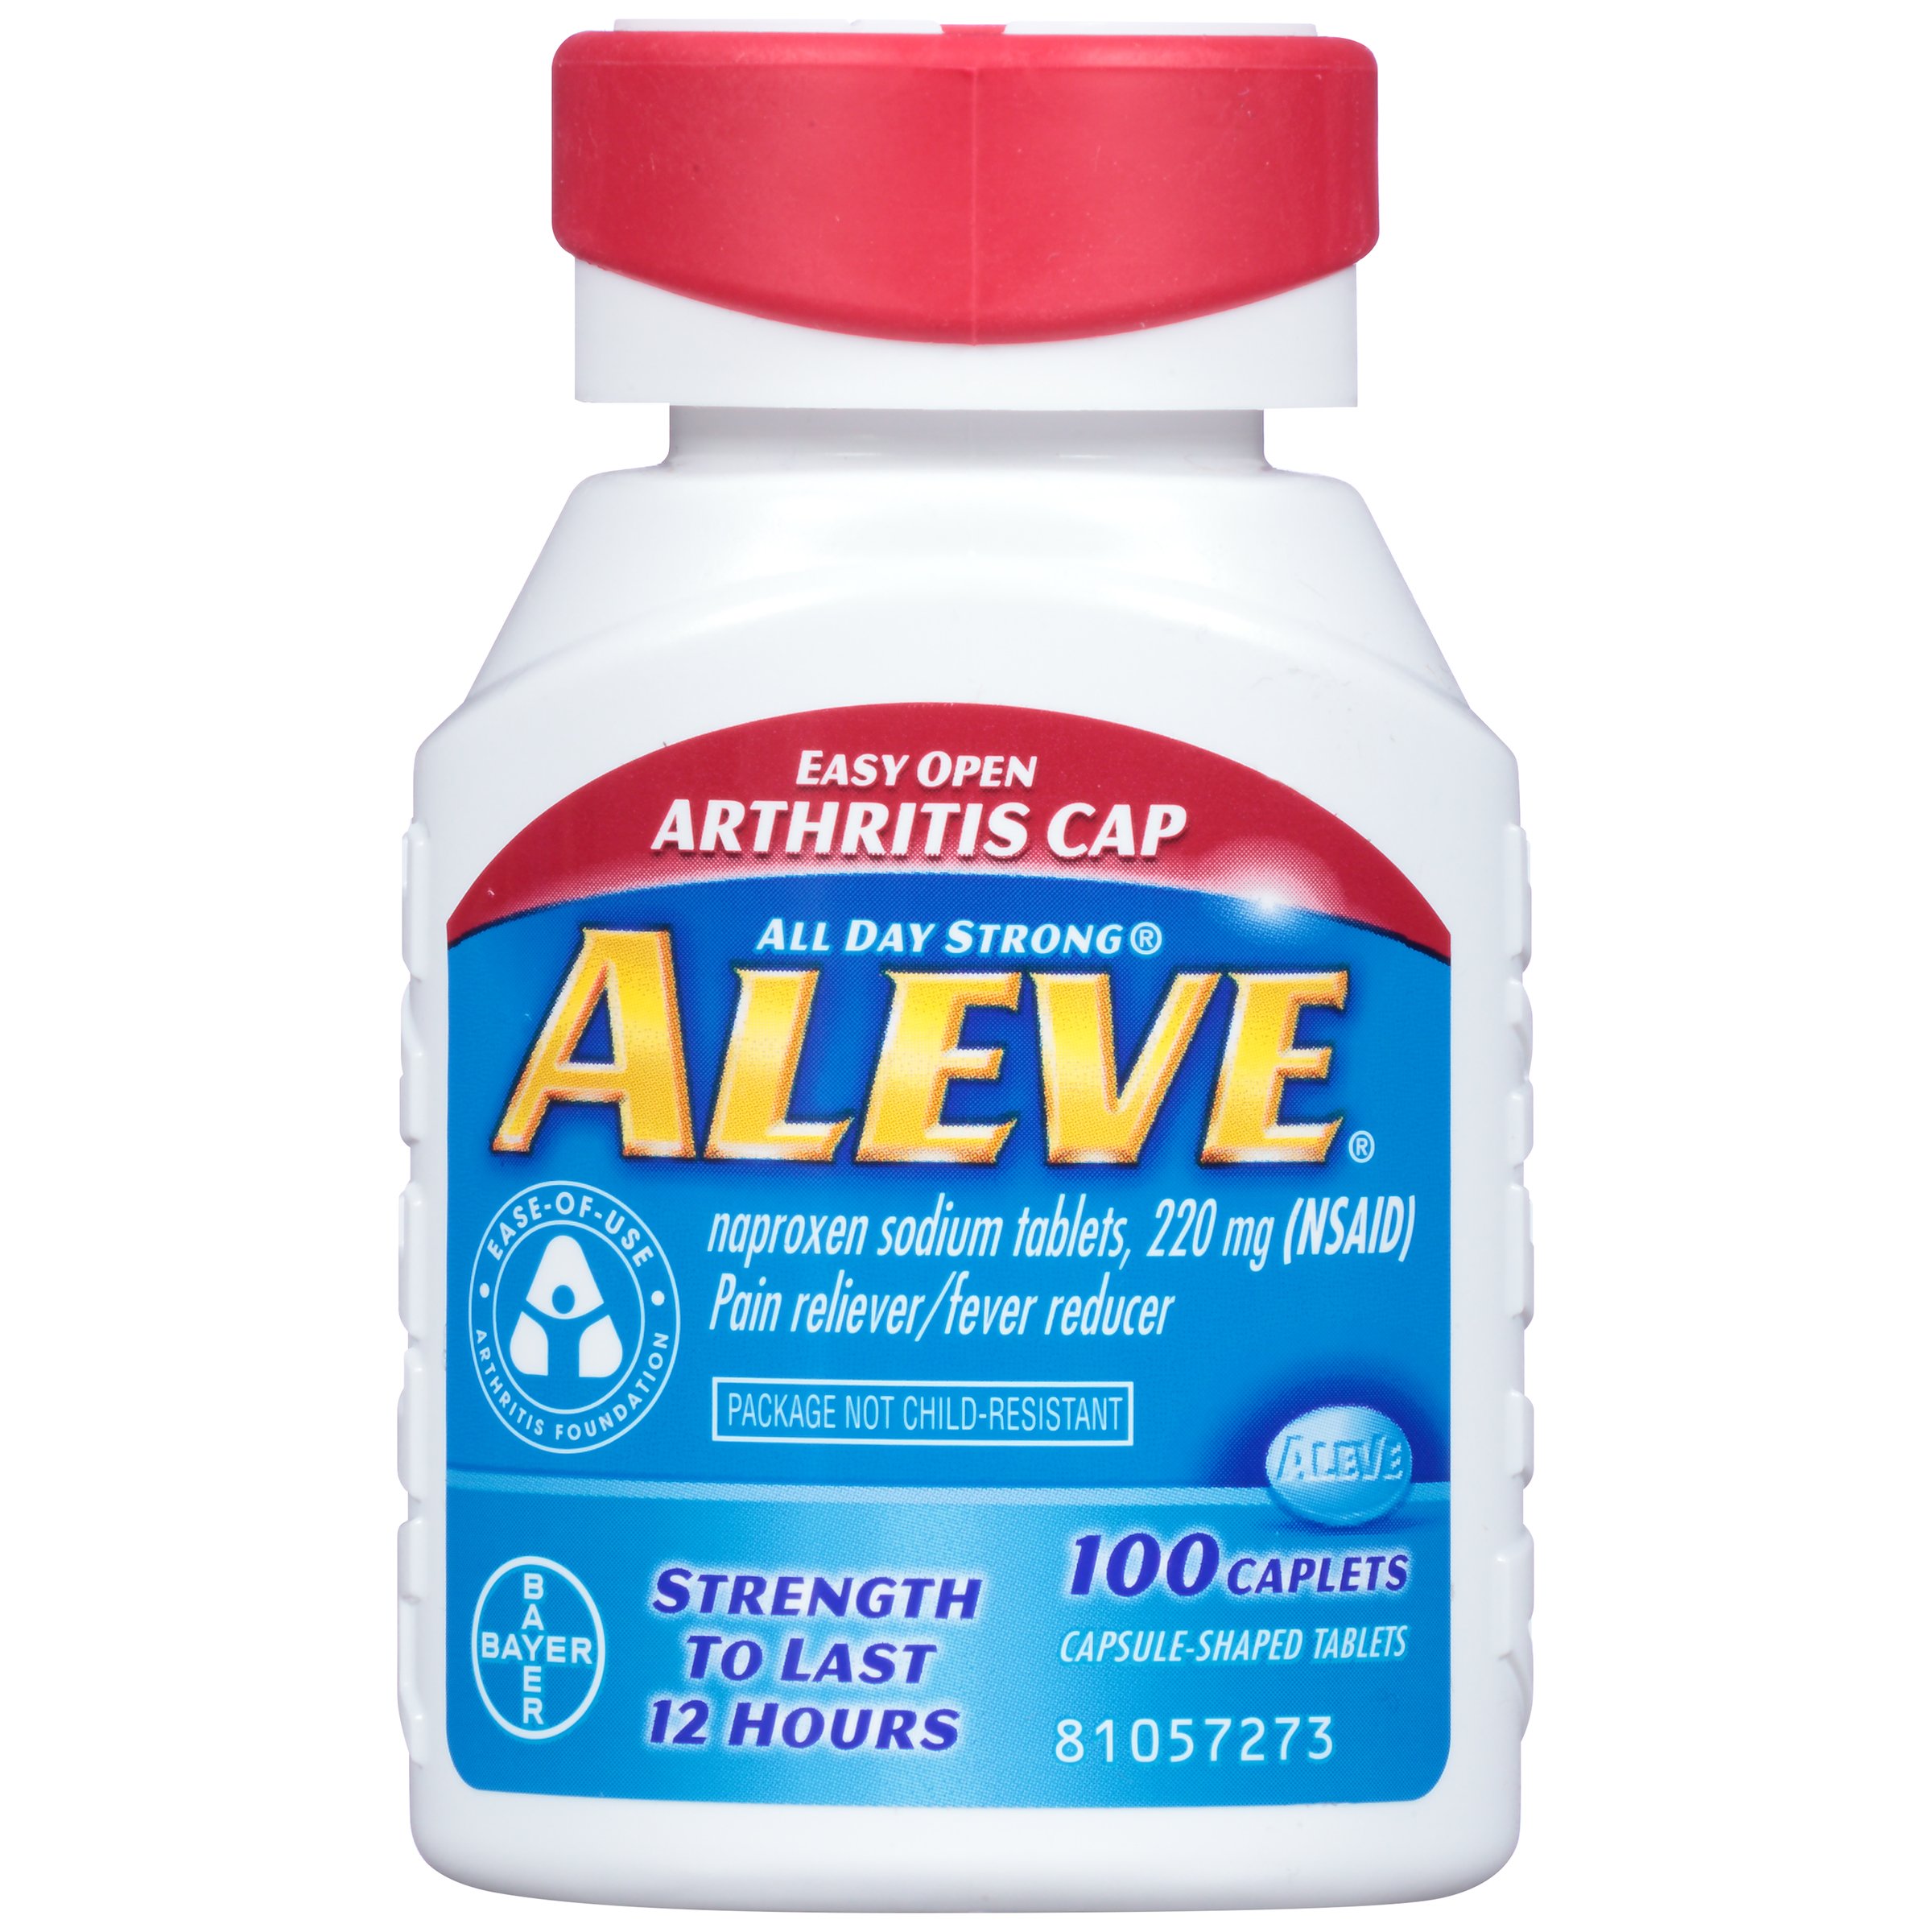 is aleve better than ibuprofen for pain